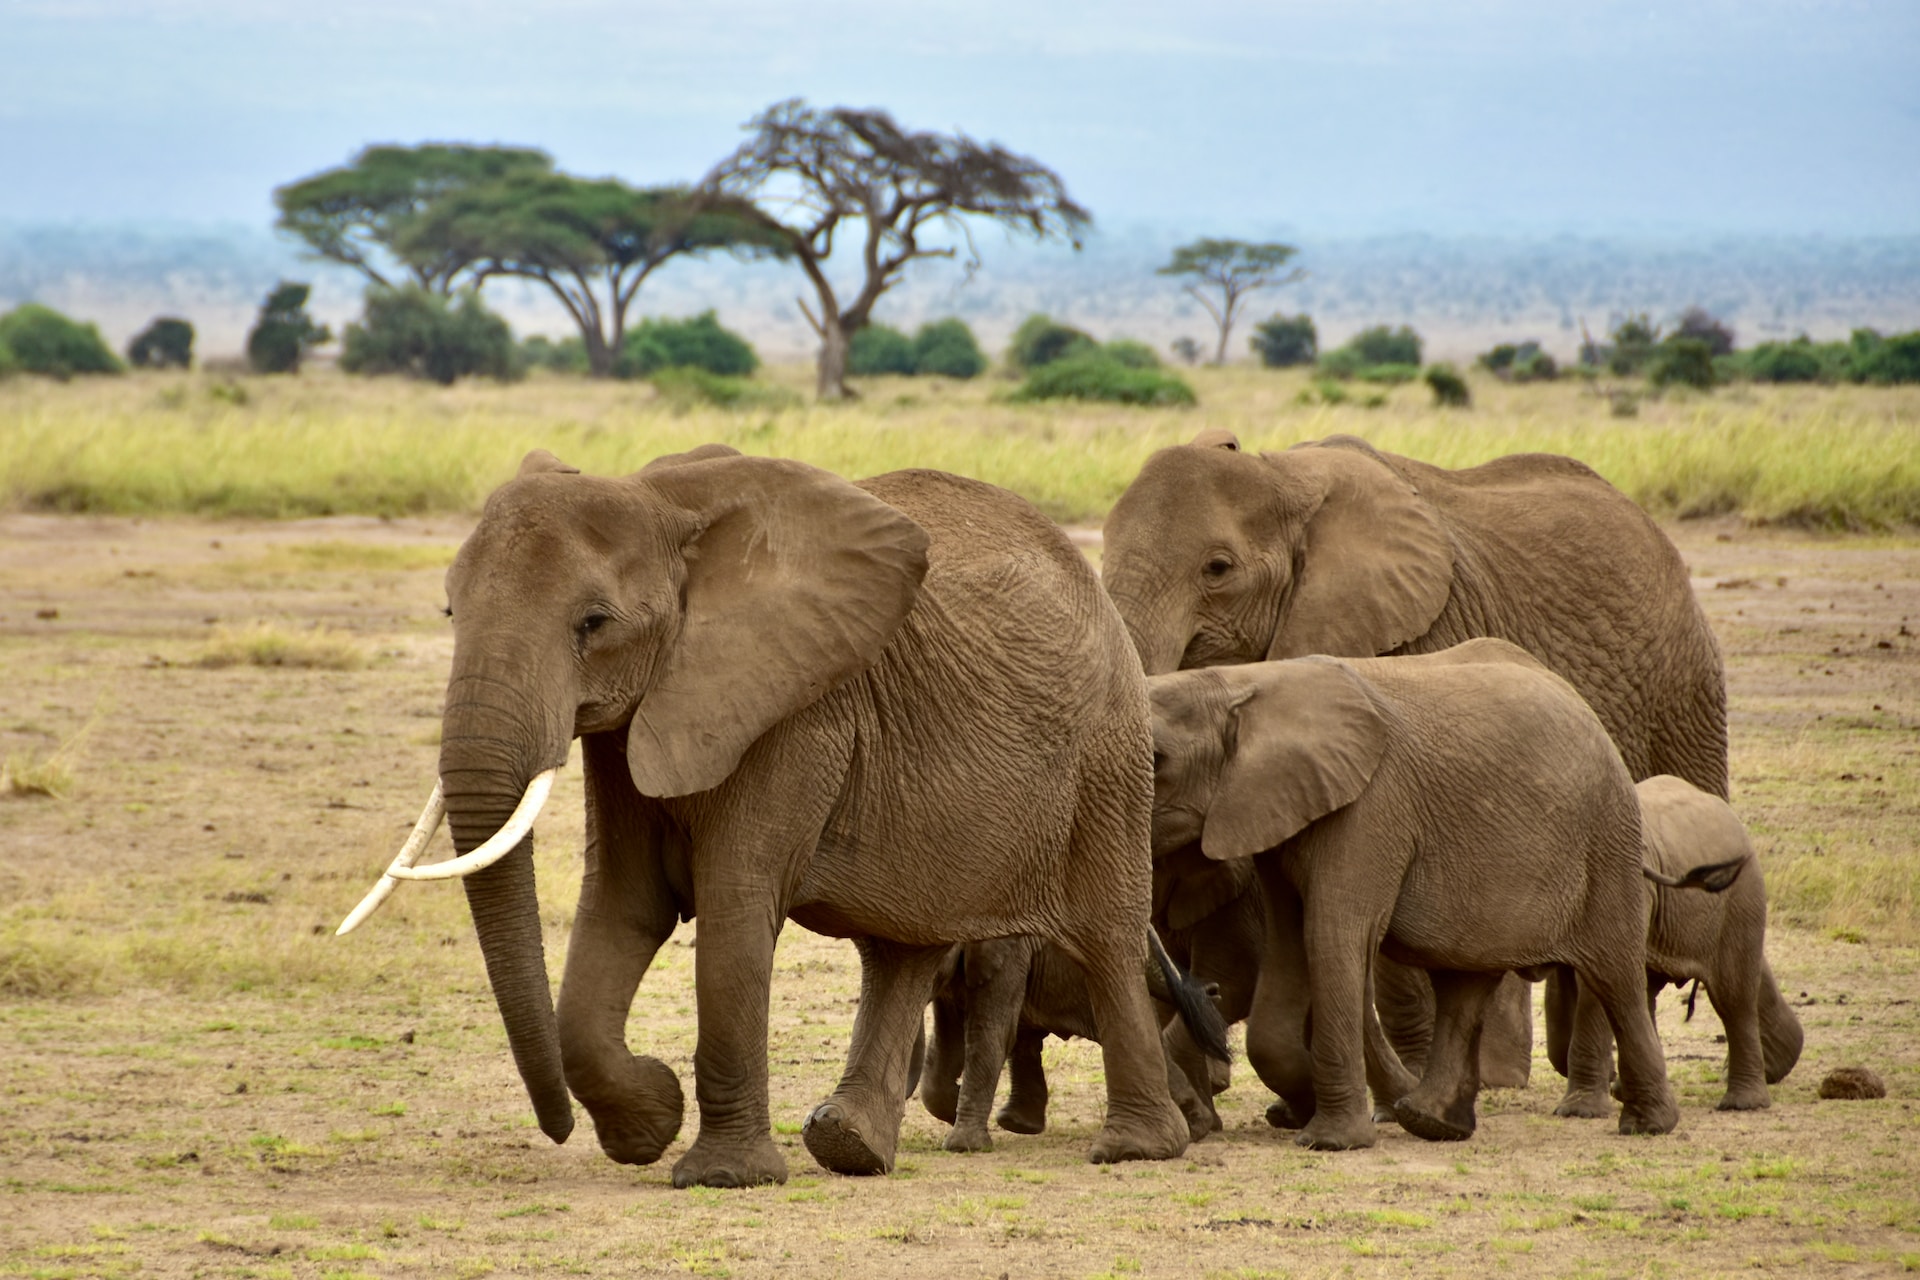 1 Day Amboseli Safari allows you to spend your day in the park